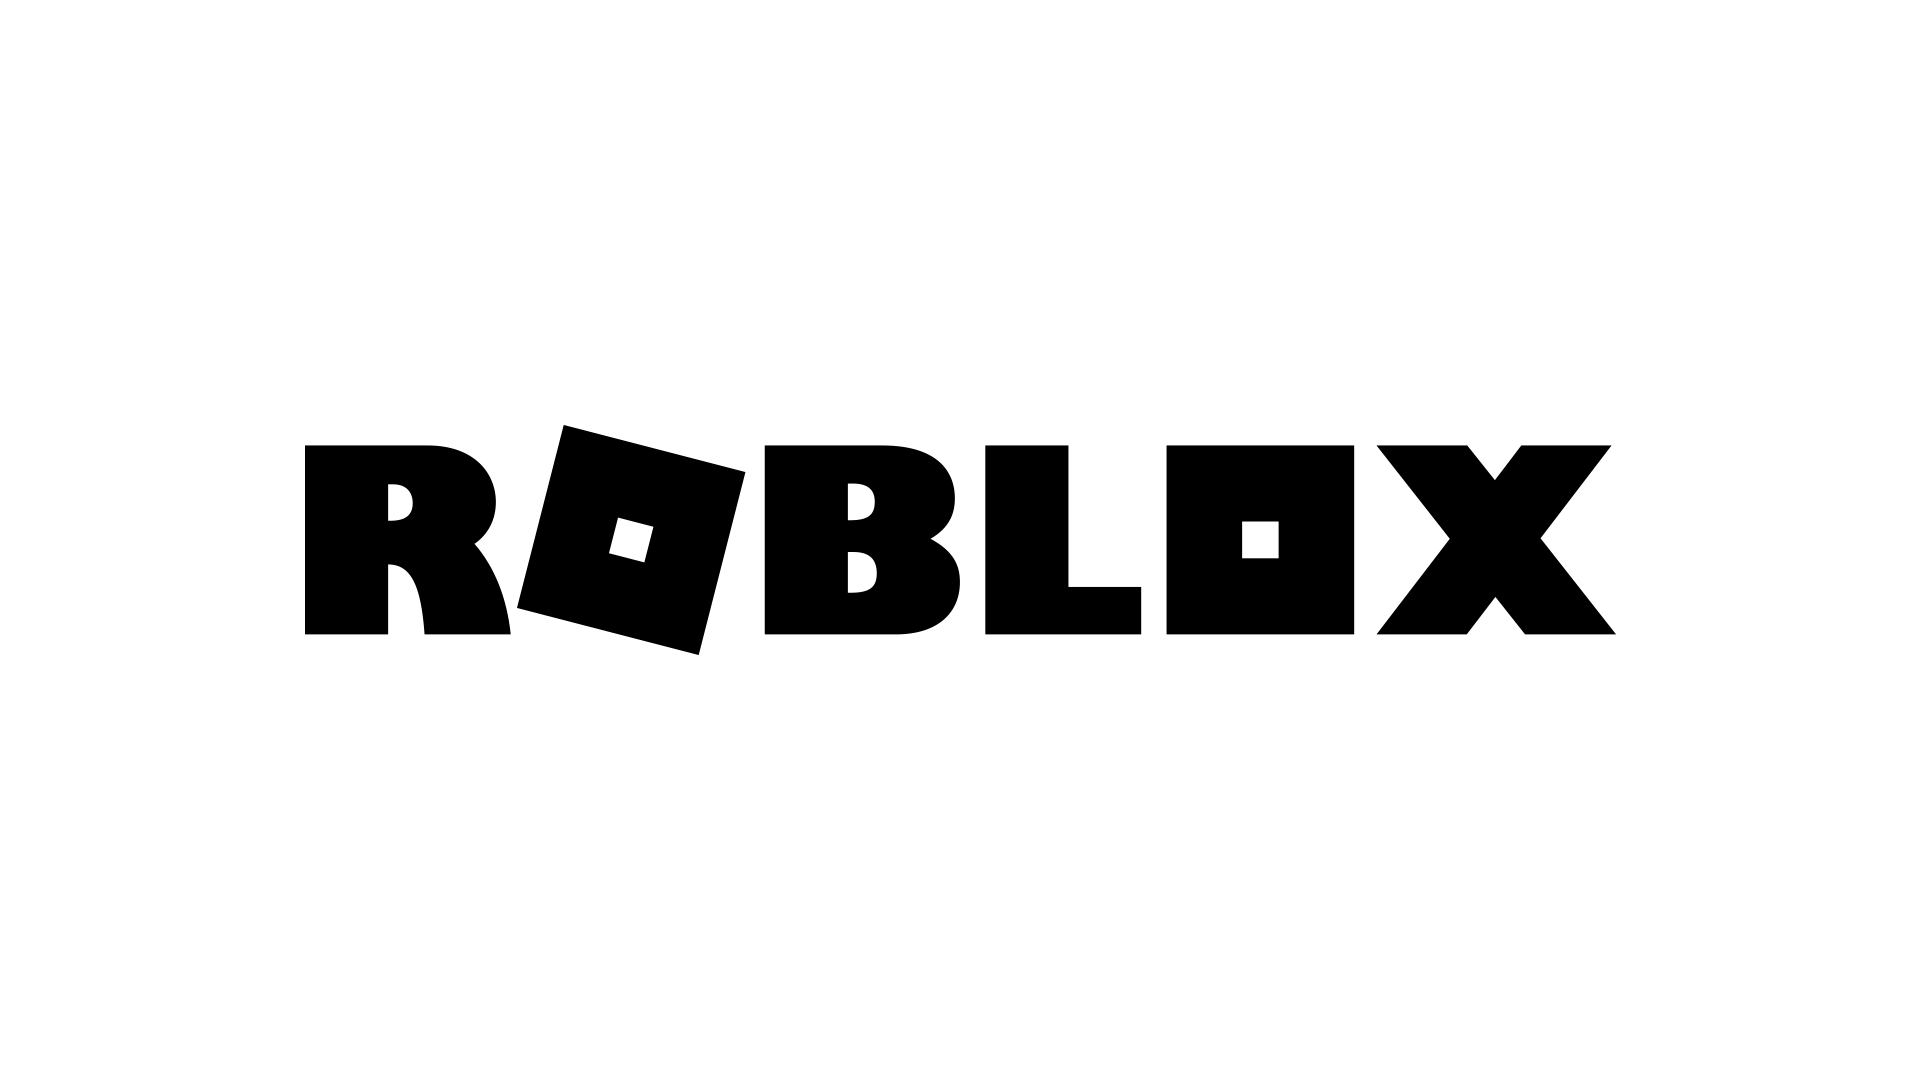 Roblox Launches Digital Civility Initiative in Push for Safety